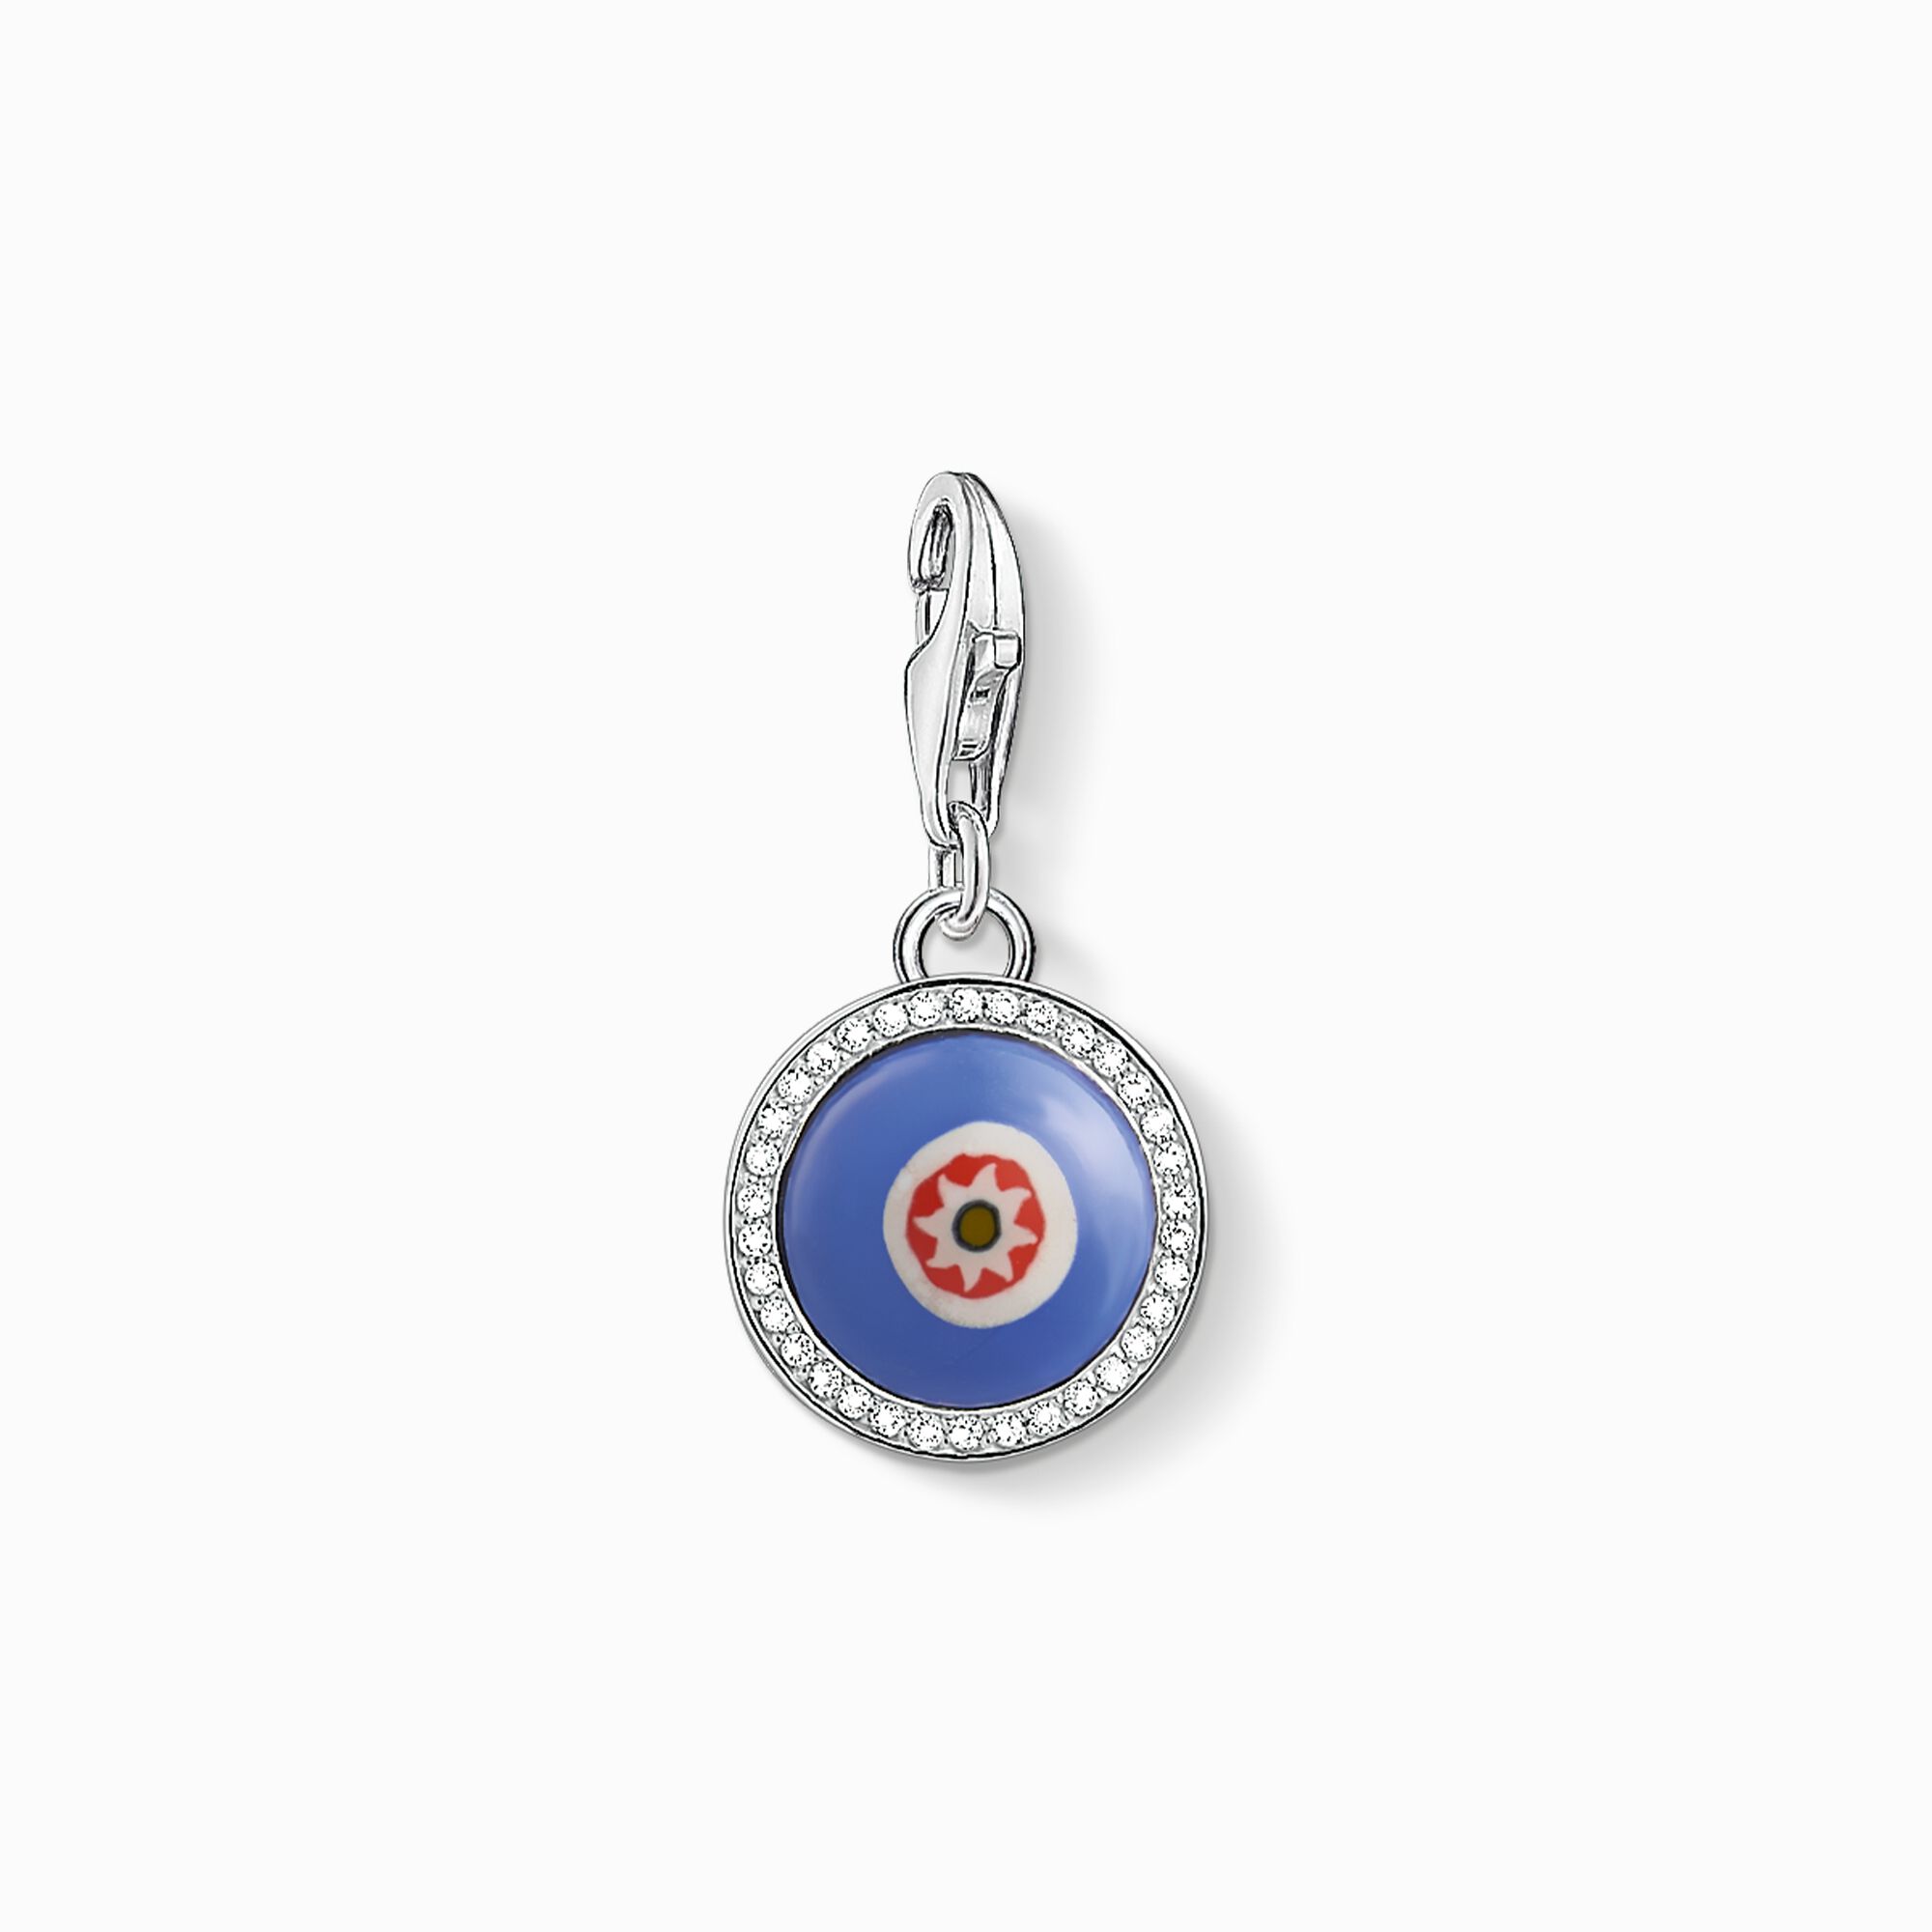 Charm pendant blue glass eye from the Charm Club collection in the THOMAS SABO online store